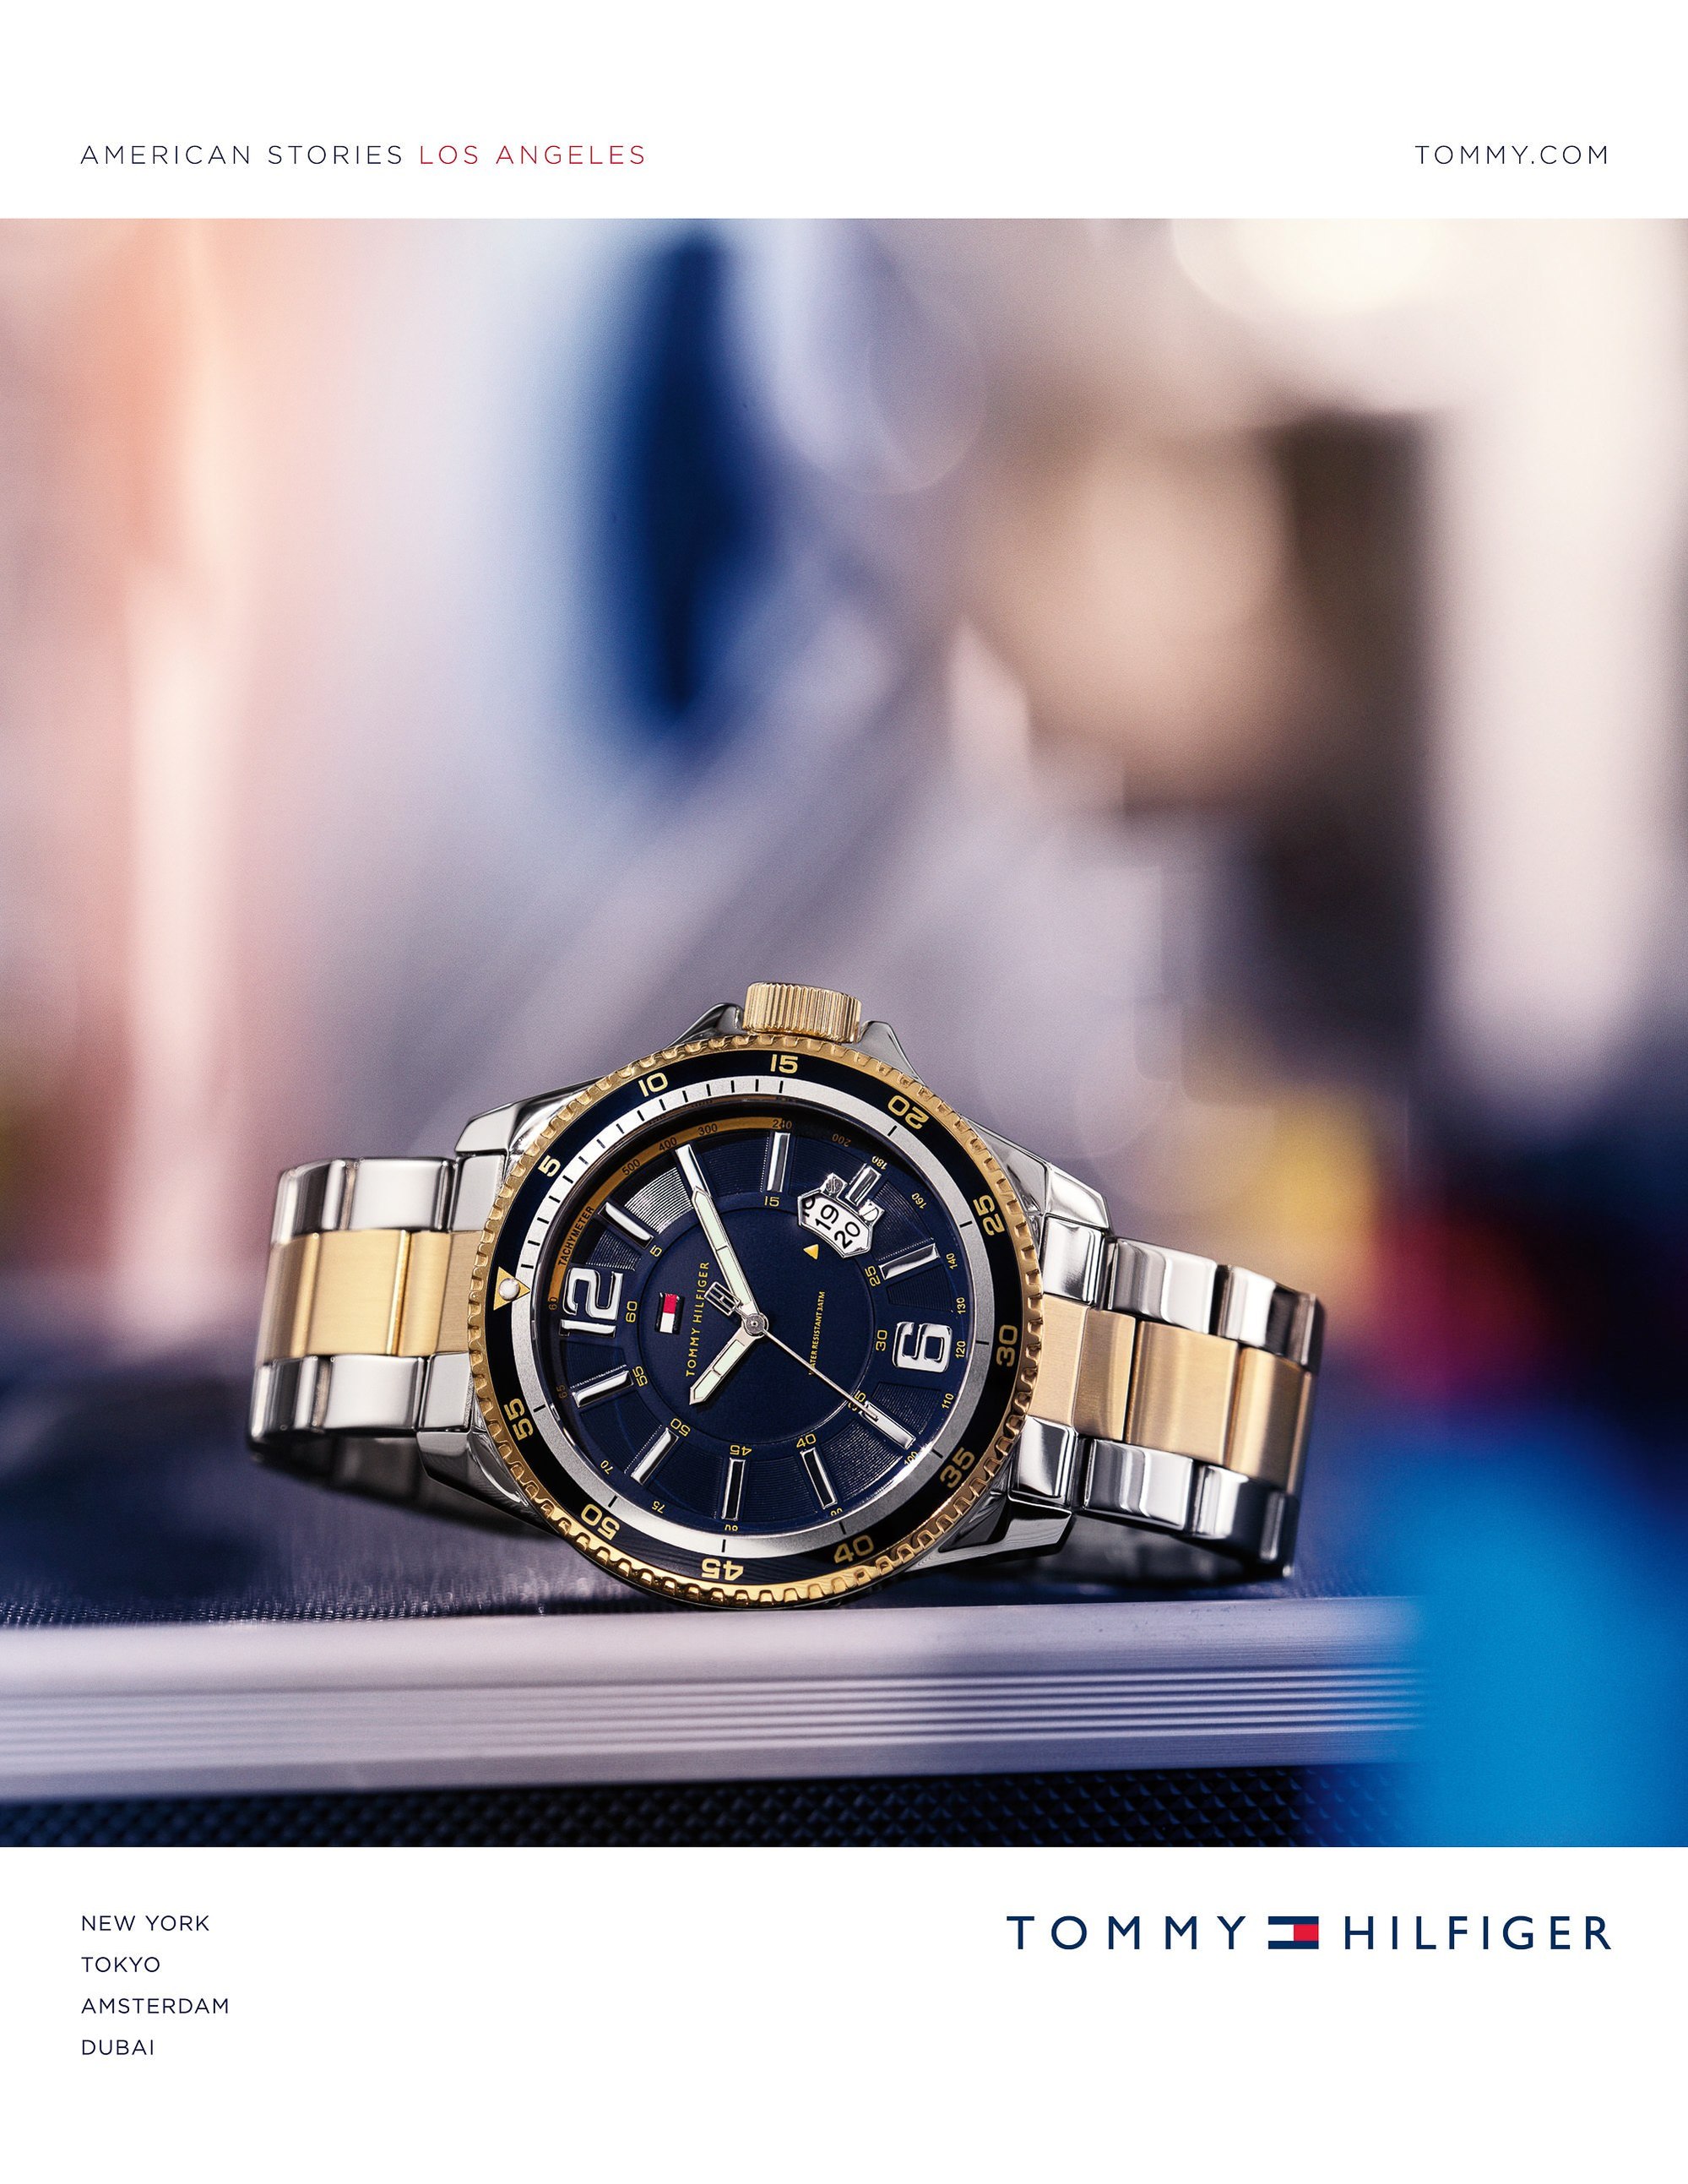 Commercial still life photography and product photography for timepiece and watch advertising campaigns by still life photographer, product photographer and commercial photographer Timothy Hogan in Los Angeles for Tommy Hilfiger